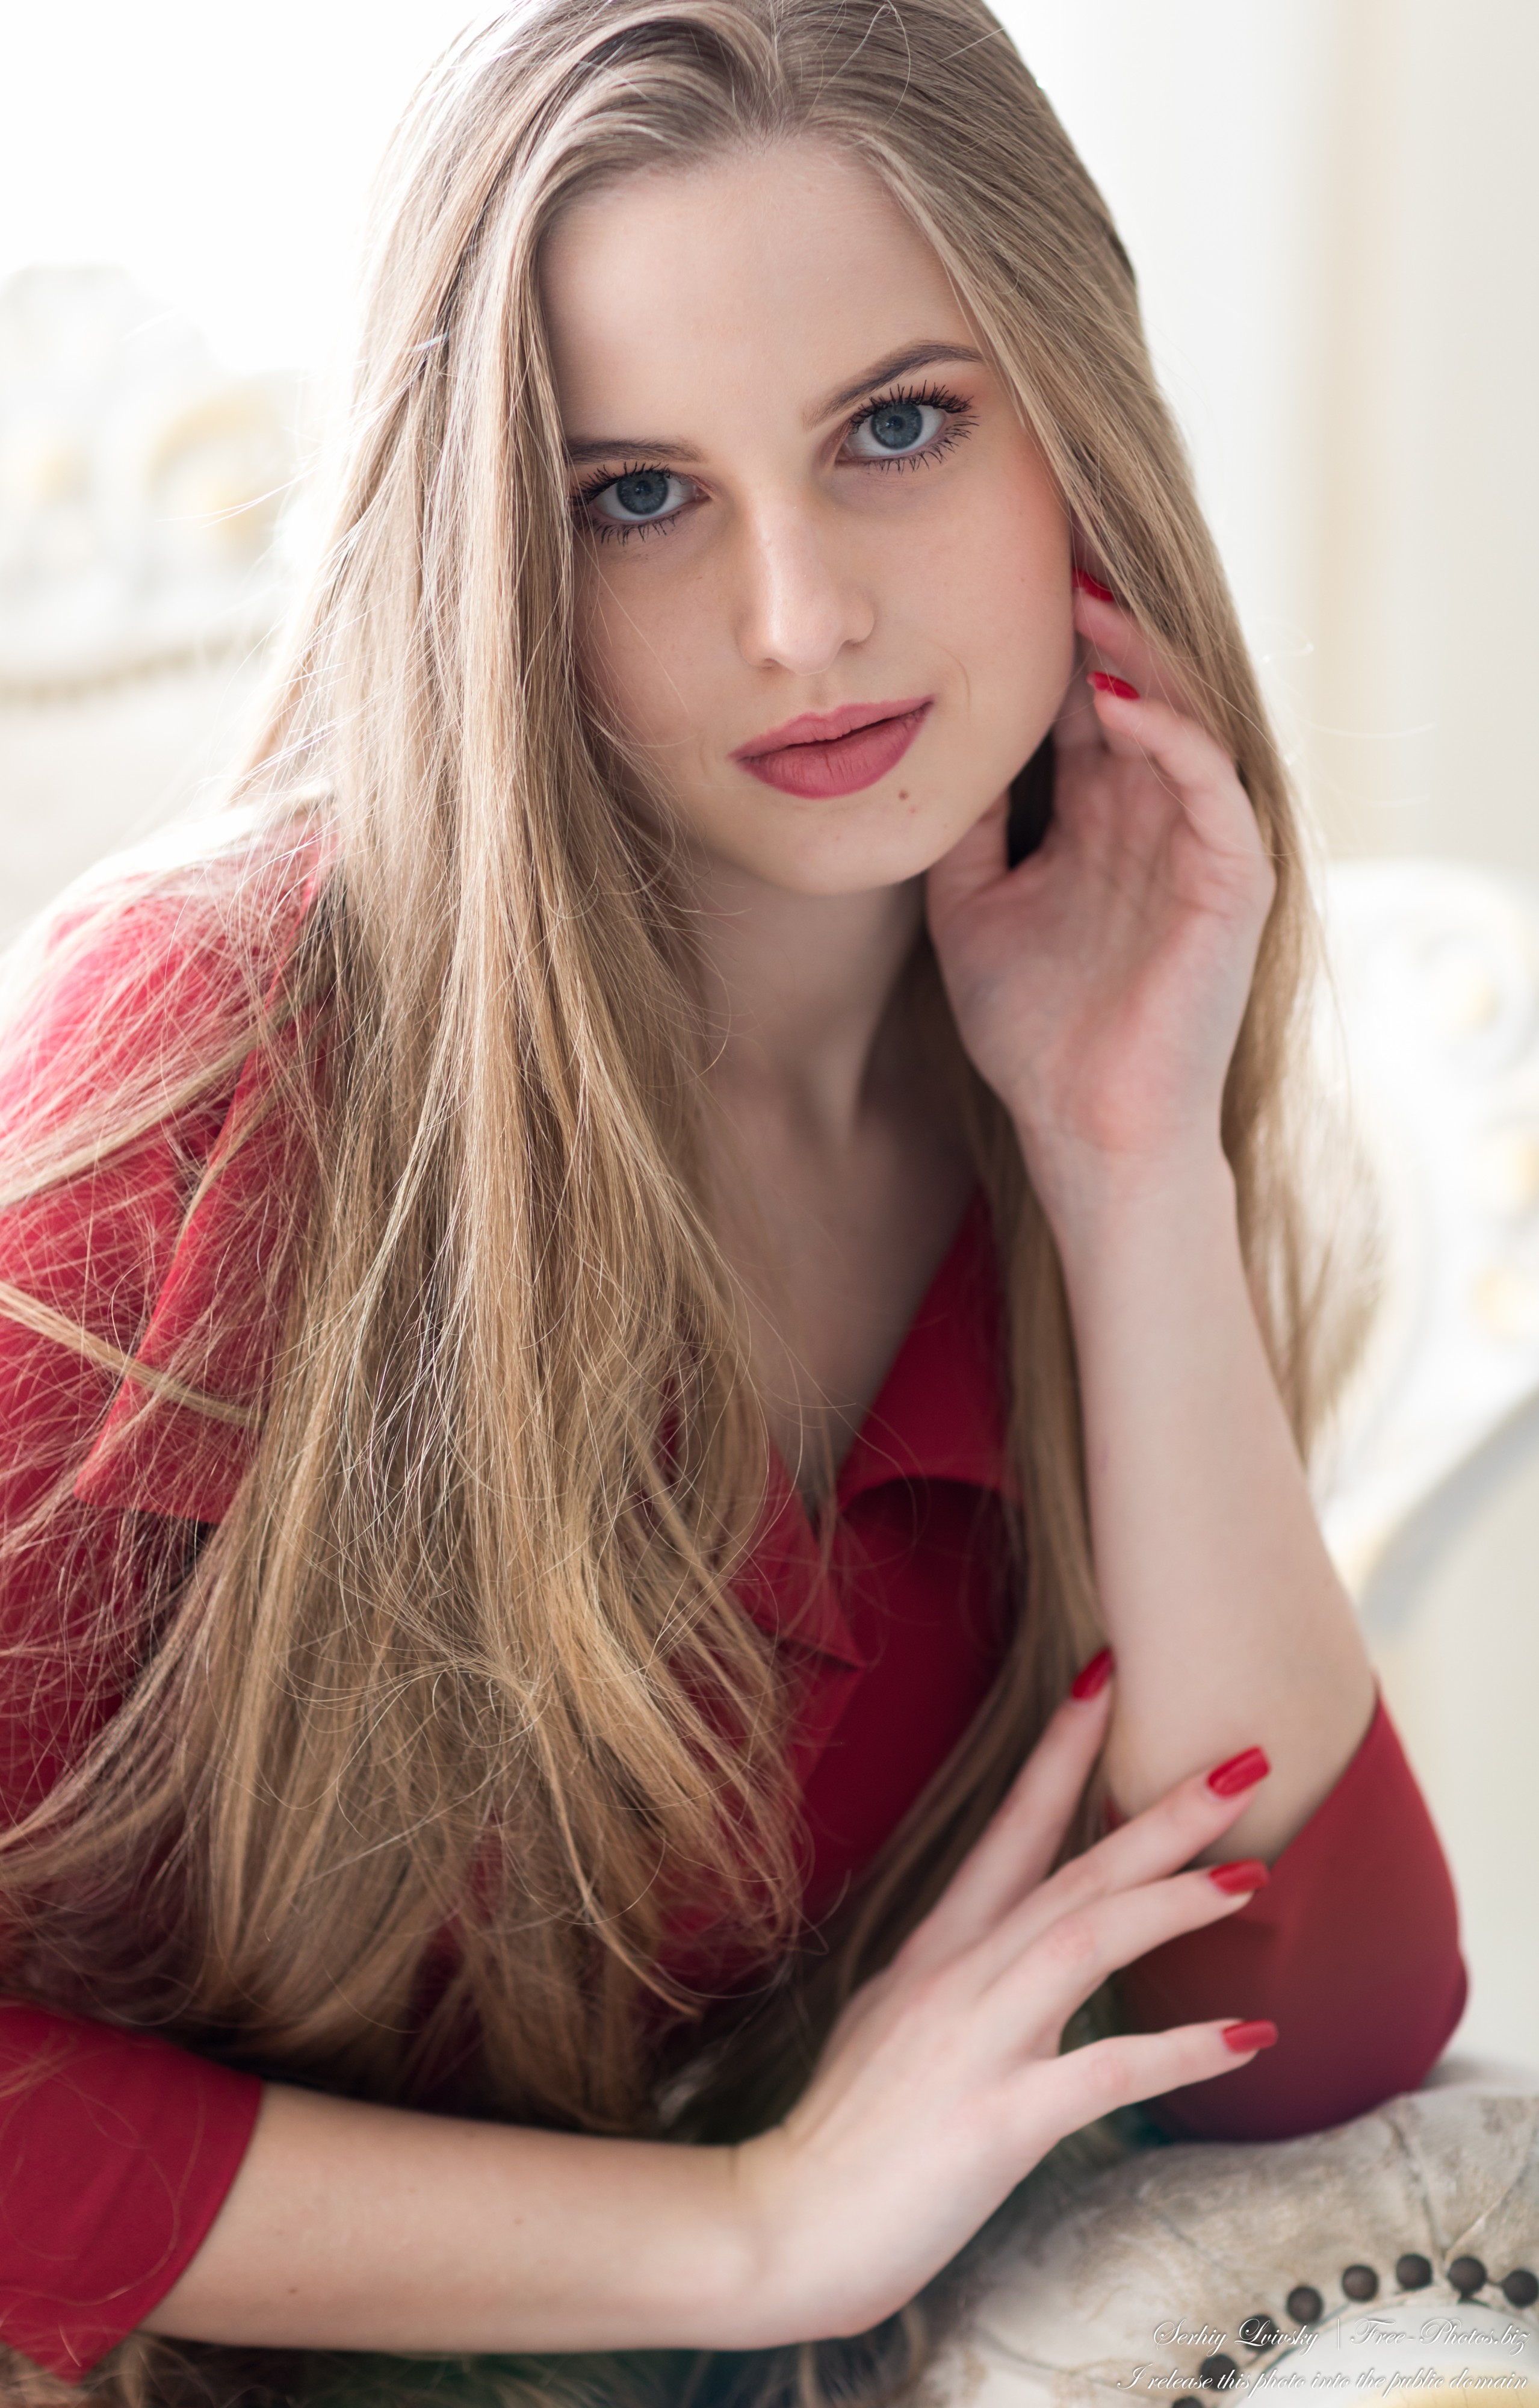 Diana - a 20-year-old natural blonde girl photographed in December 2022 by Serhiy Lvivsky, picture 26